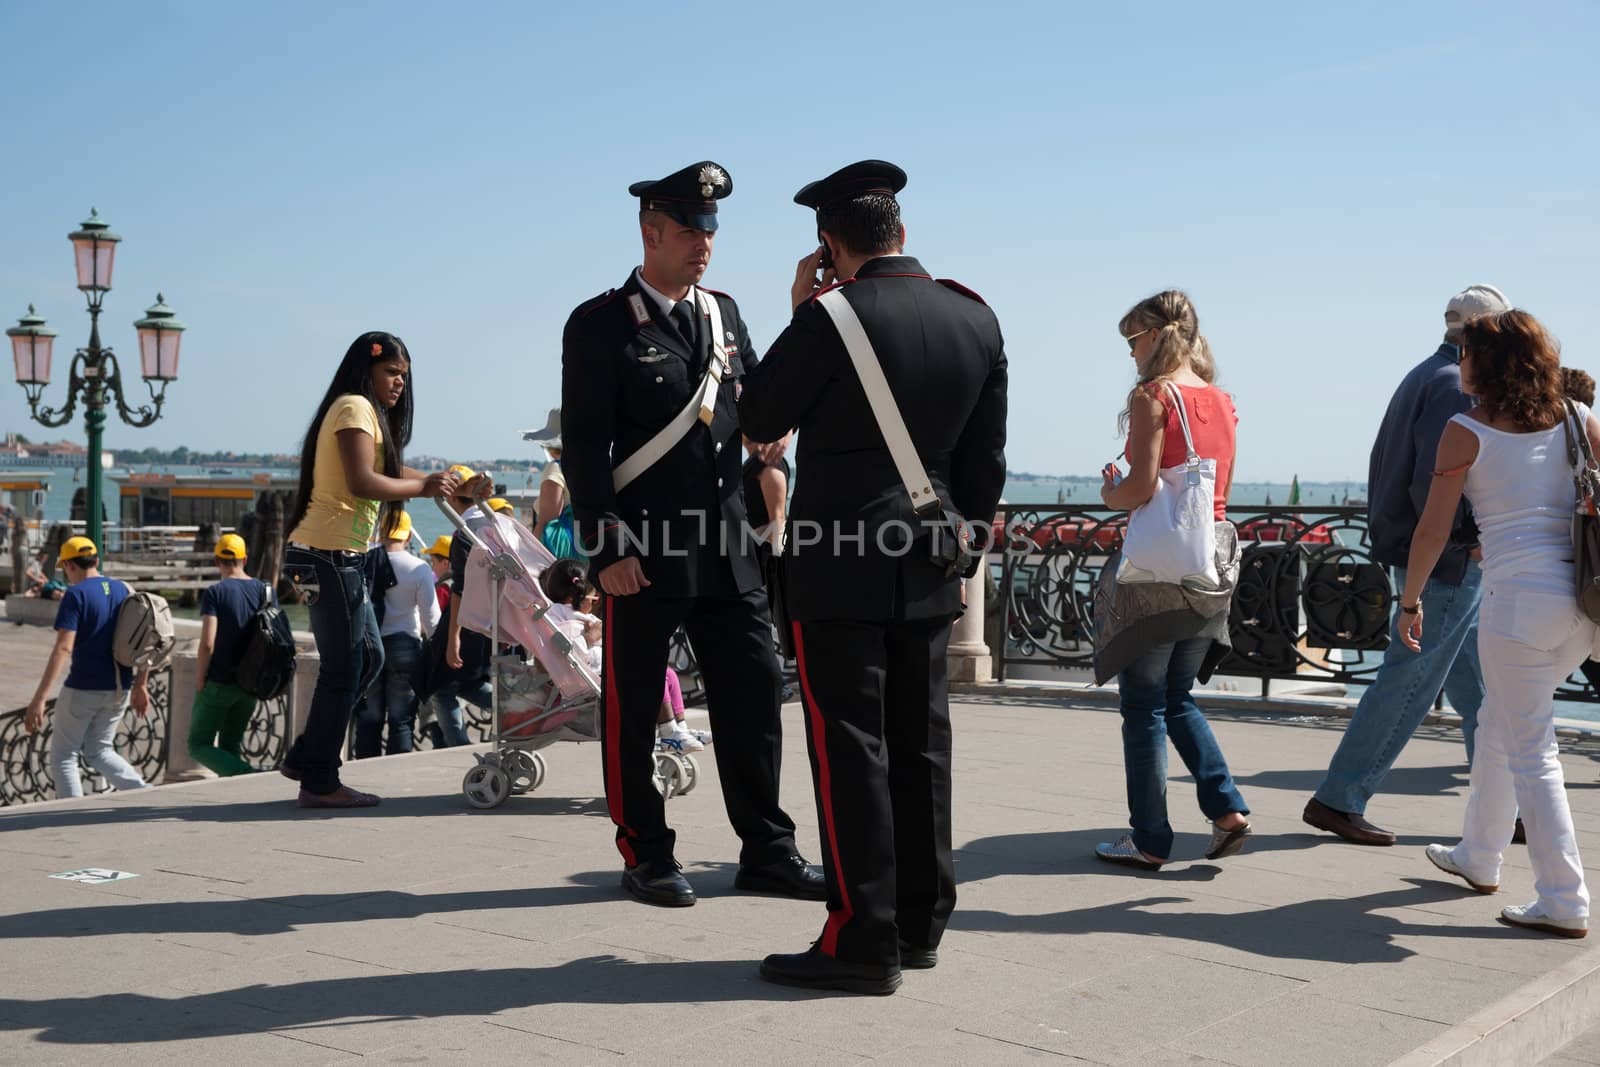 Uniformed police keep a watchful eye in Venice. by brians101